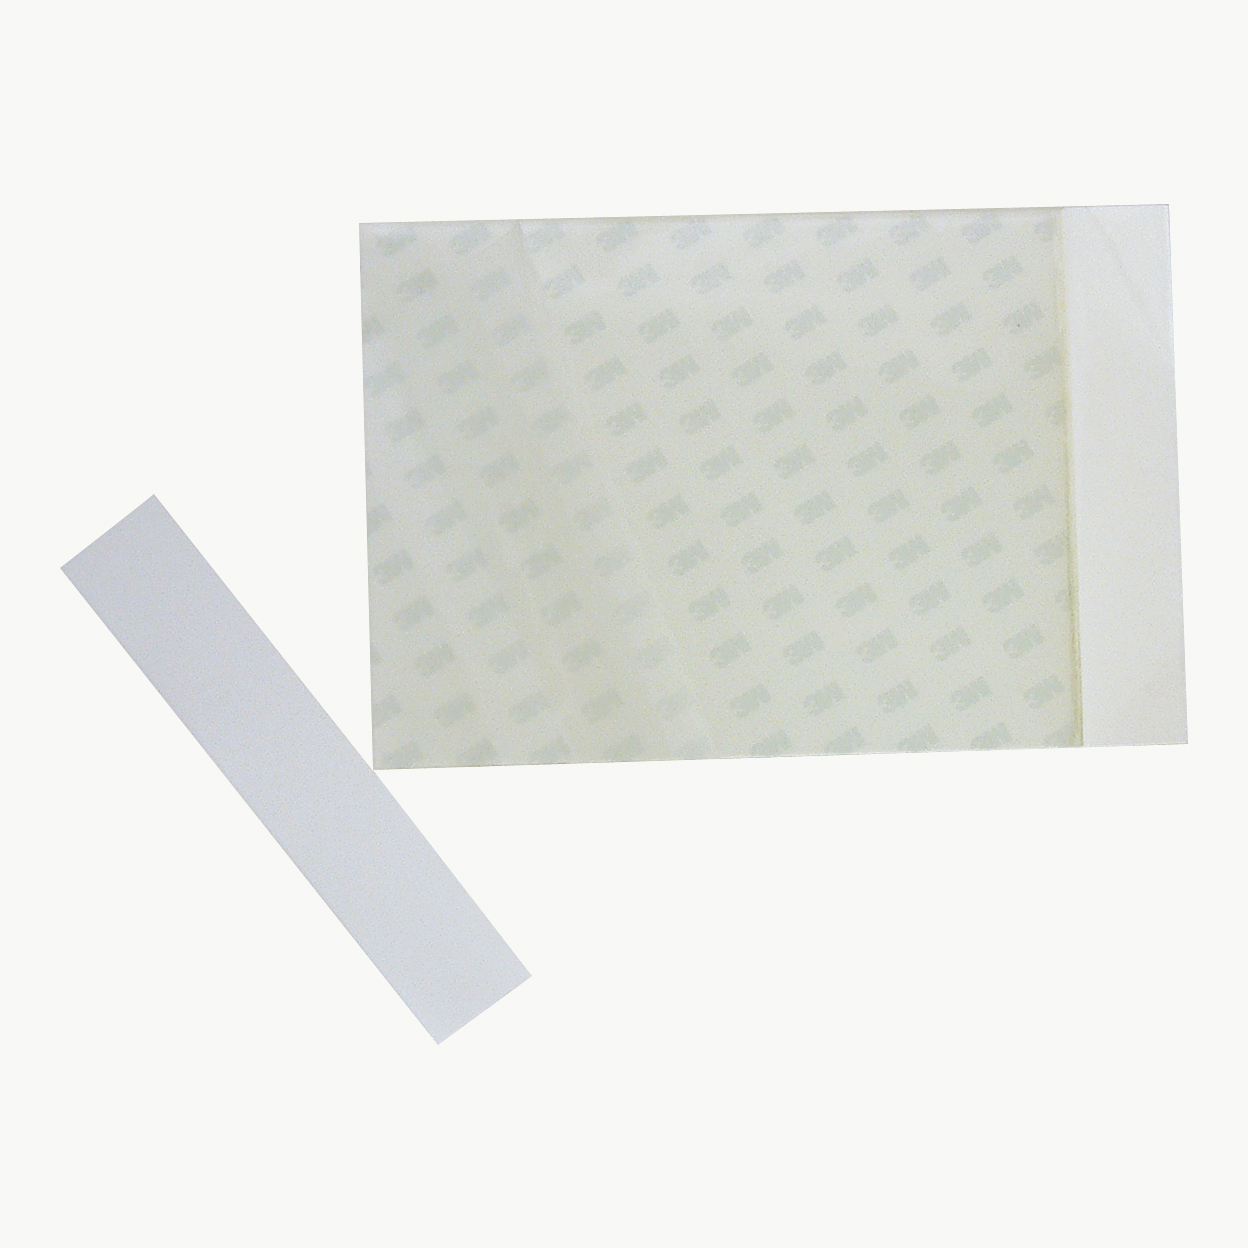 3M ScotchPad Packaging and Protection Tape Pads